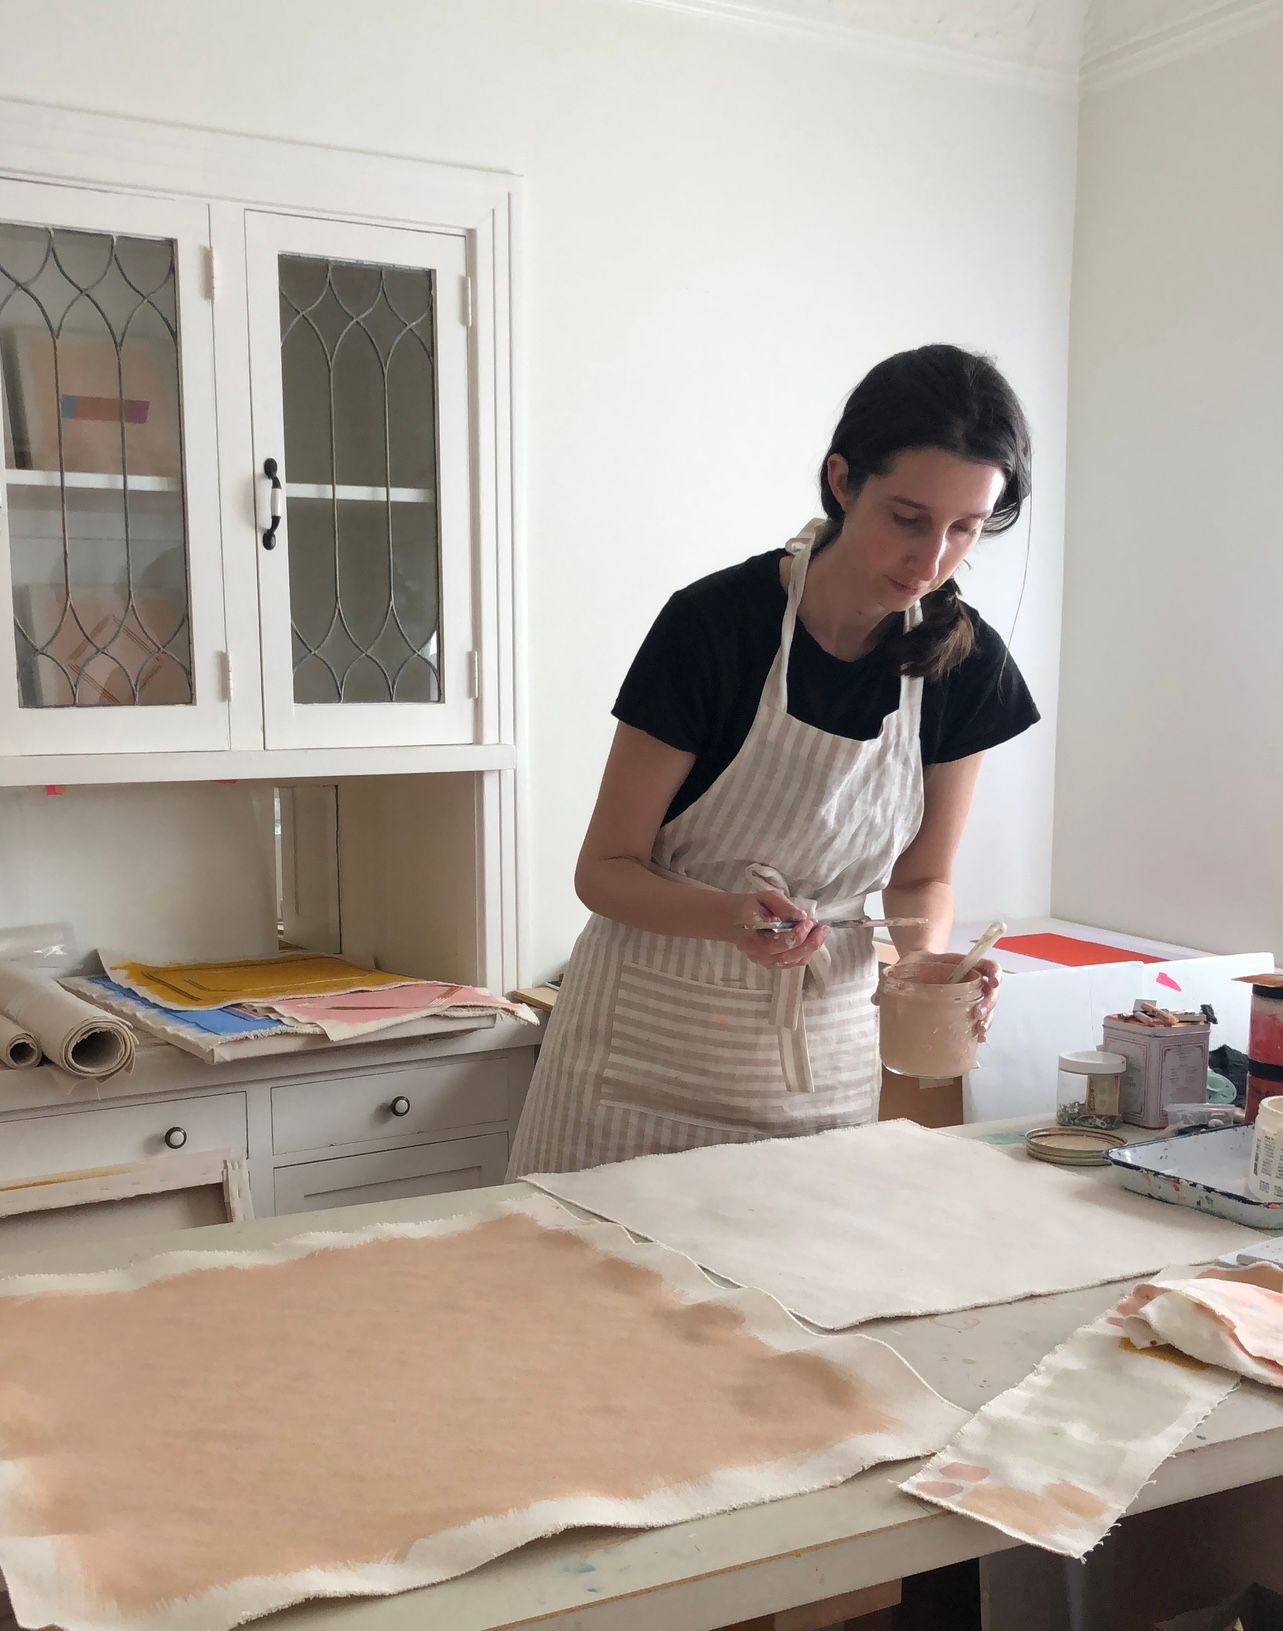 Emily Keating Snyder in her studio painting loose canvas with a peachy pink color. She is wearing an apron and leans over the canvas with brush in hand 